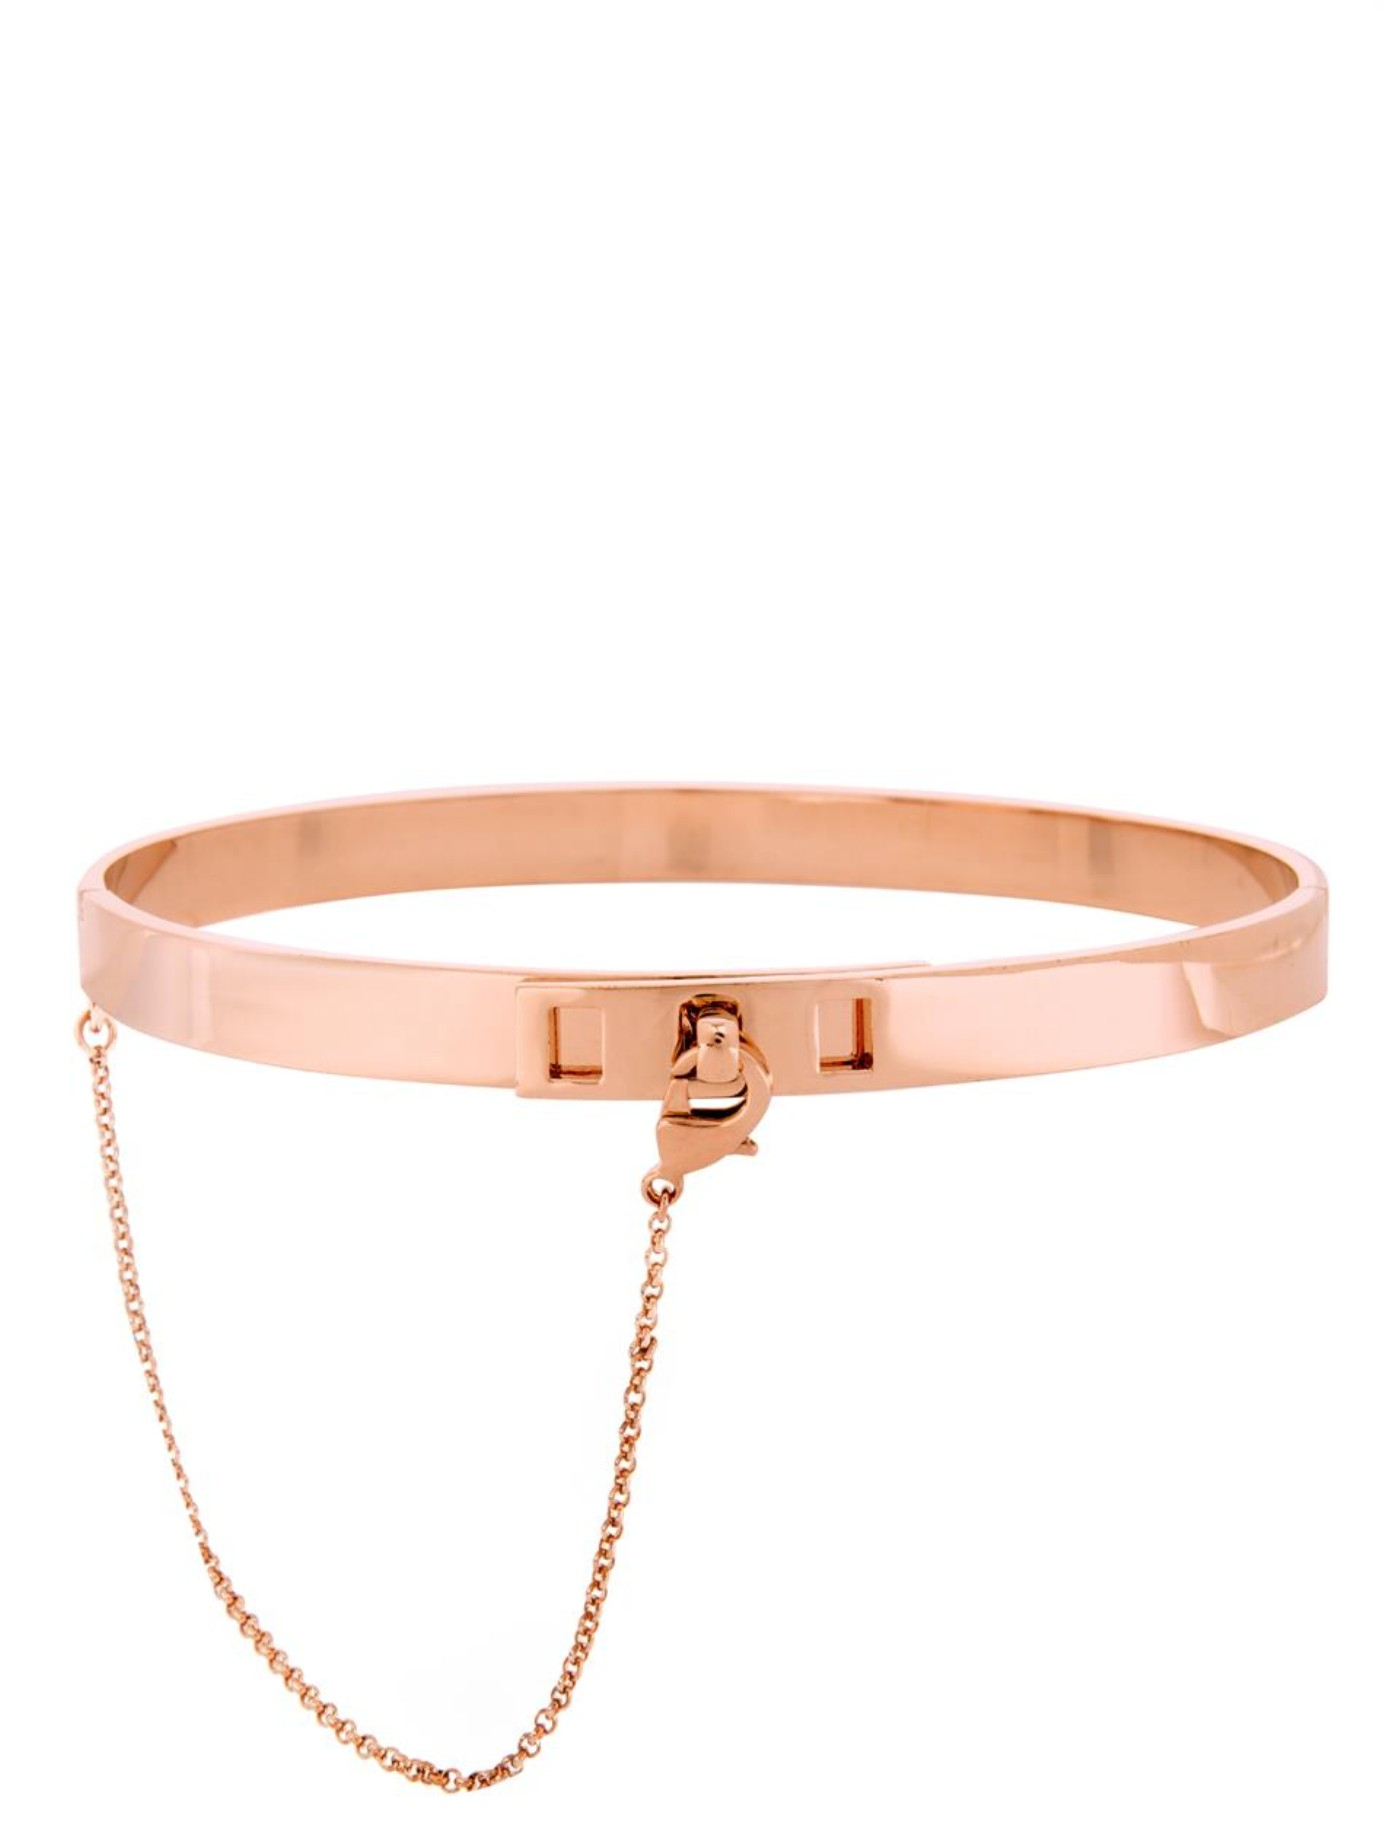 Eddie Borgo Safety Chain Choker Necklace in Rose Gold ...